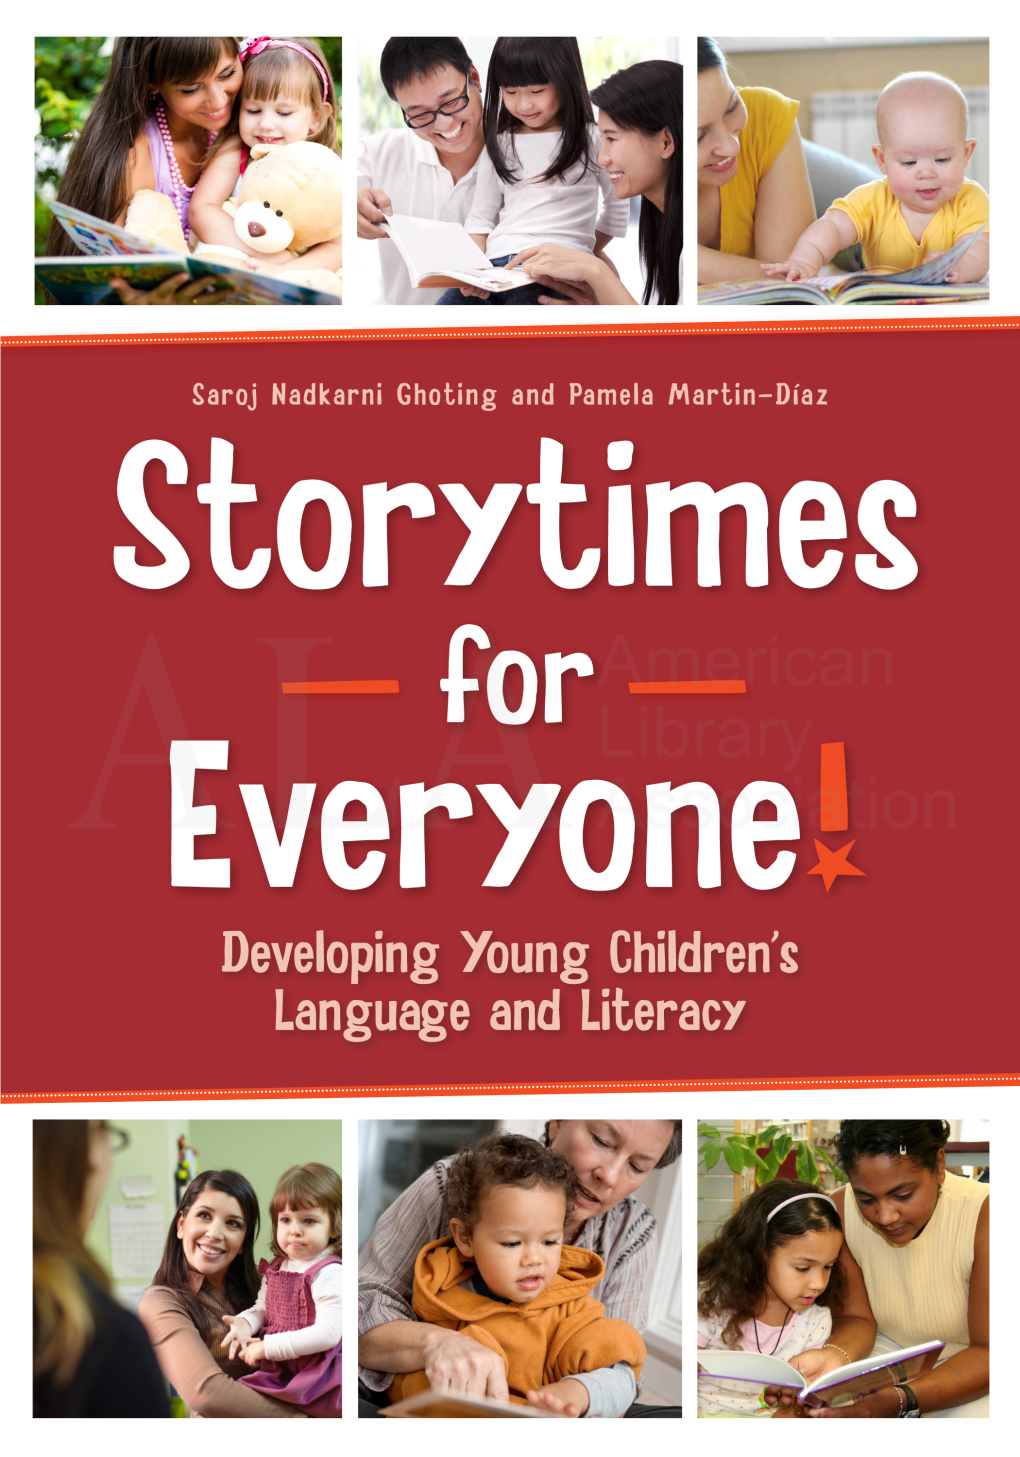 Storytimes for Everyone! Developing Young Children's Language